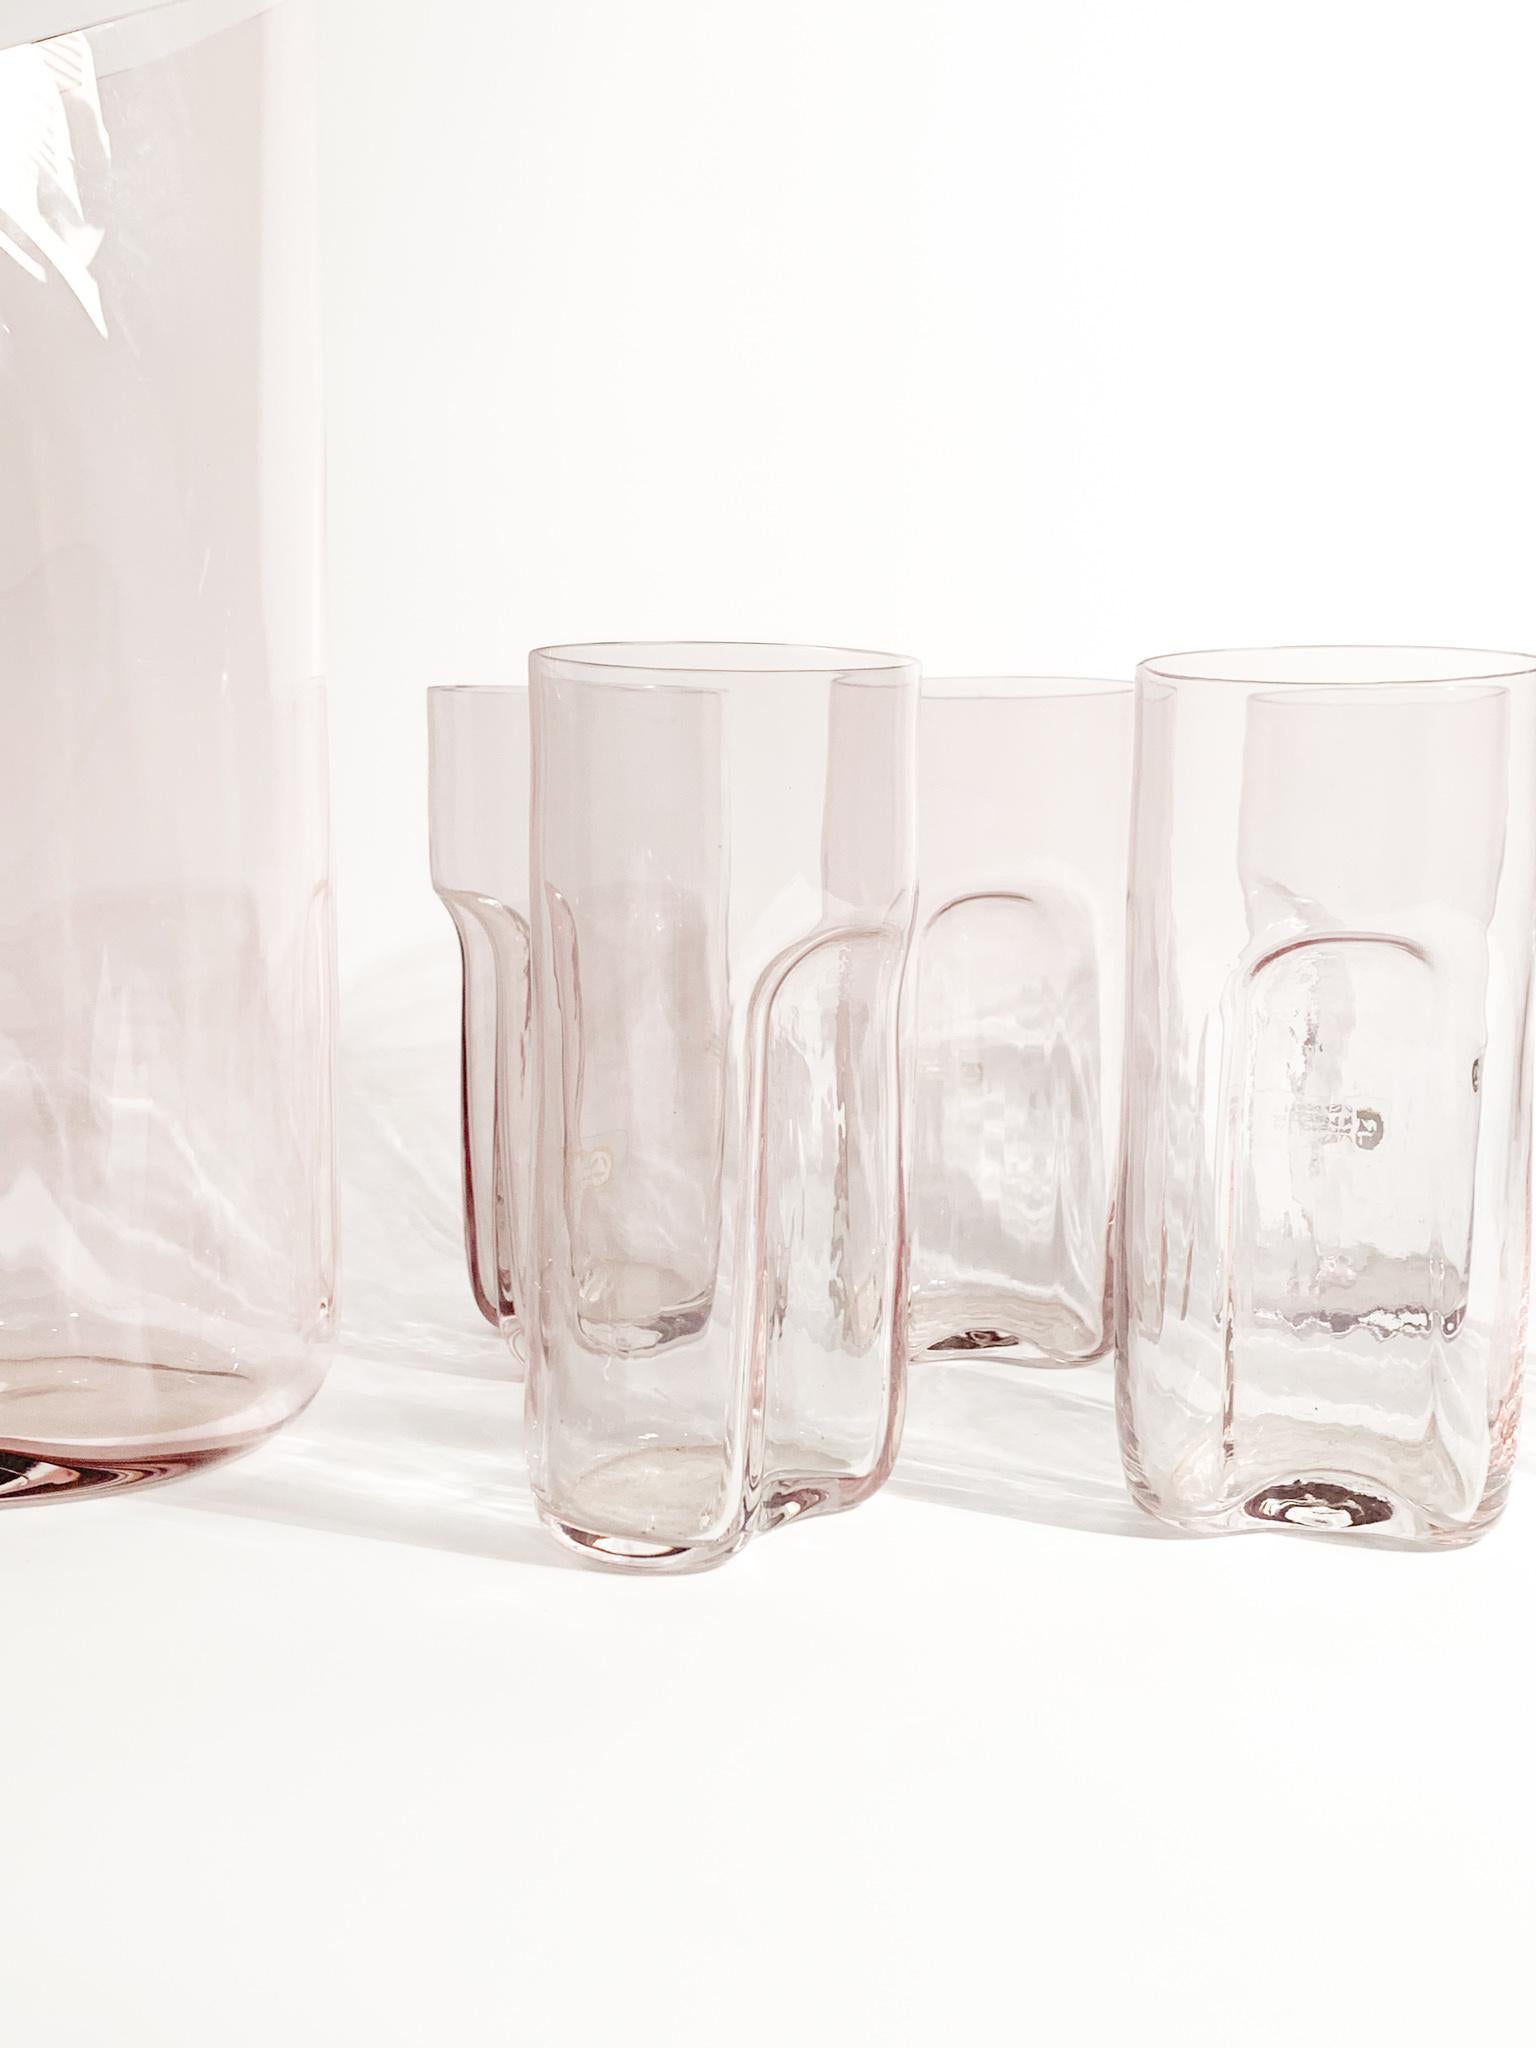 Set of Six Glasses and Carafe in Murano Glass by Cenedese and Albarelli 1970s For Sale 2